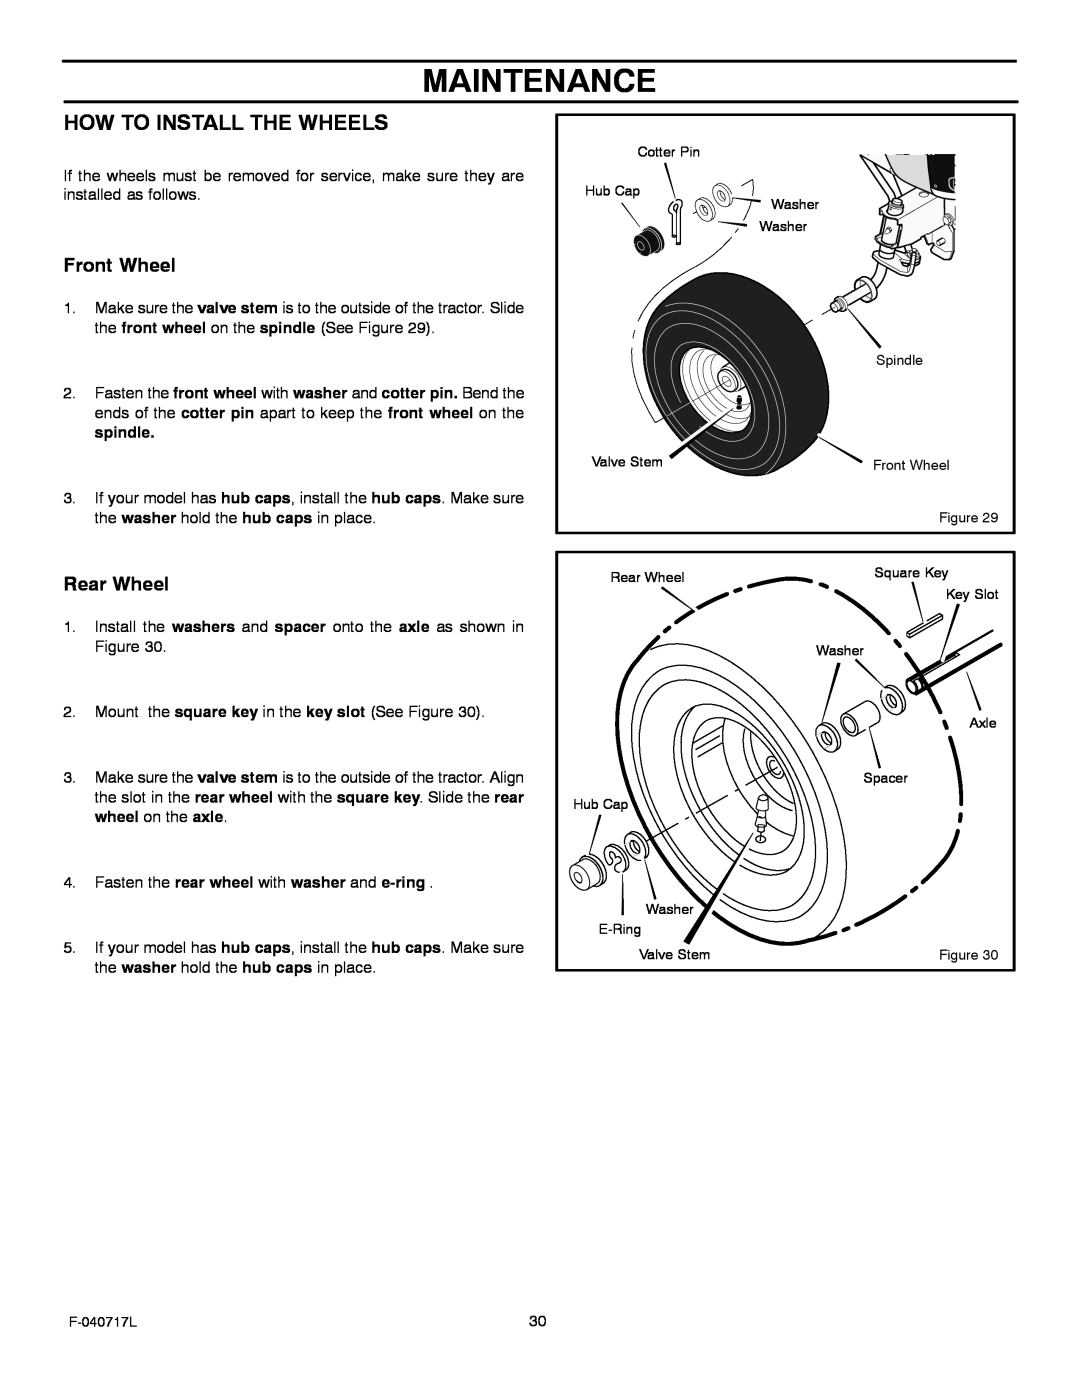 Murray 387002x92A manual Maintenance, How To Install The Wheels, Front Wheel, Rear Wheel 